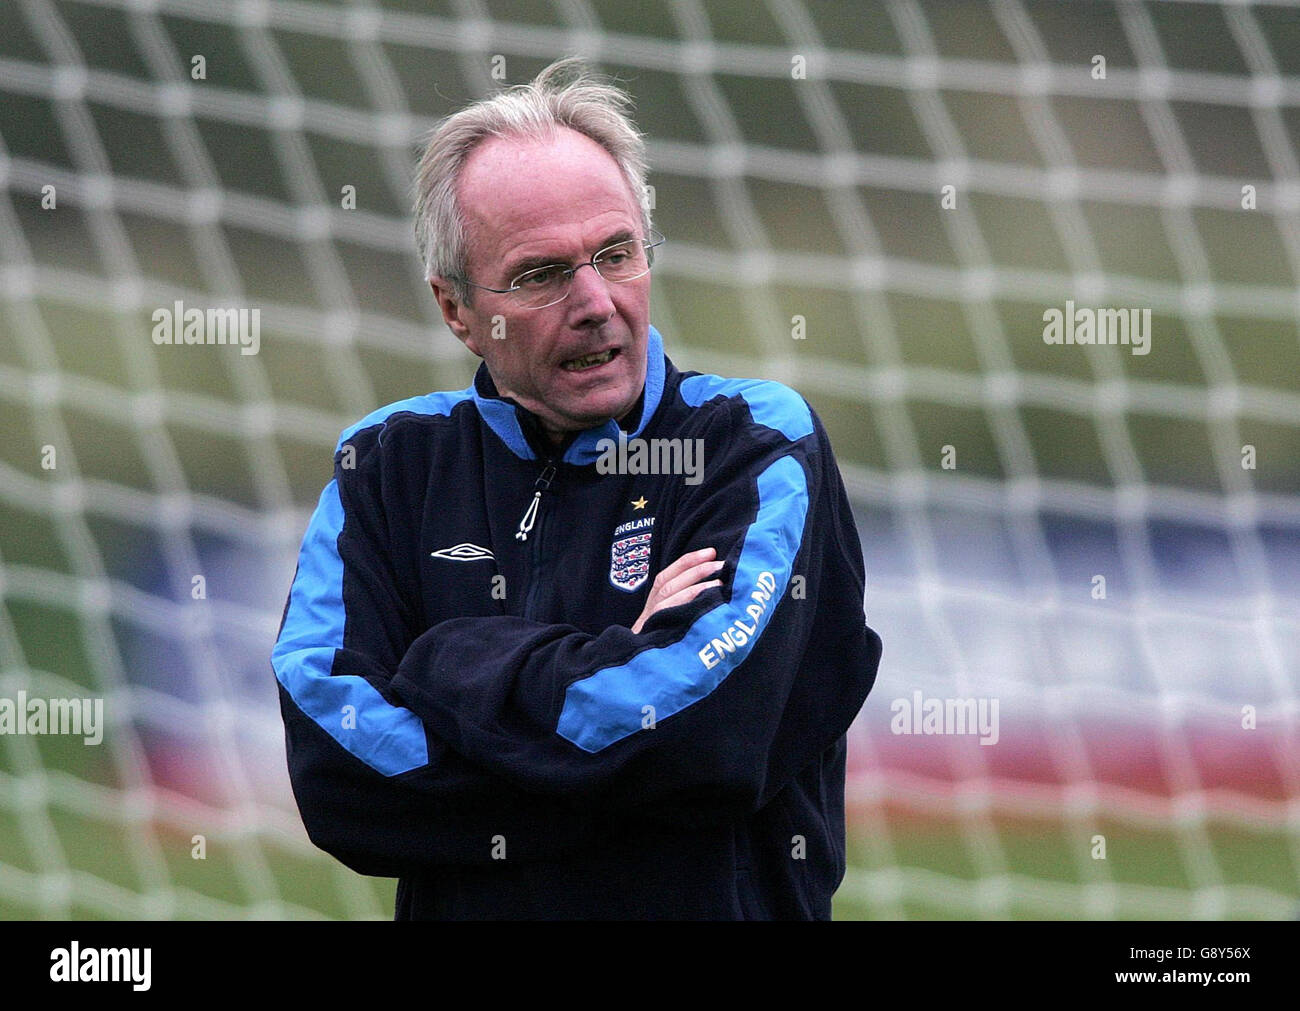 England manager Sven Goran Eriksson during a training session at Carrington Training Ground, Manchester, Tuesday October 4, 2005. England play Austria in their World Cup qualifying match on Saturday. PRESS ASSOCIATION Photo. Photo credit should read: Martin Rickett/PA. Stock Photo